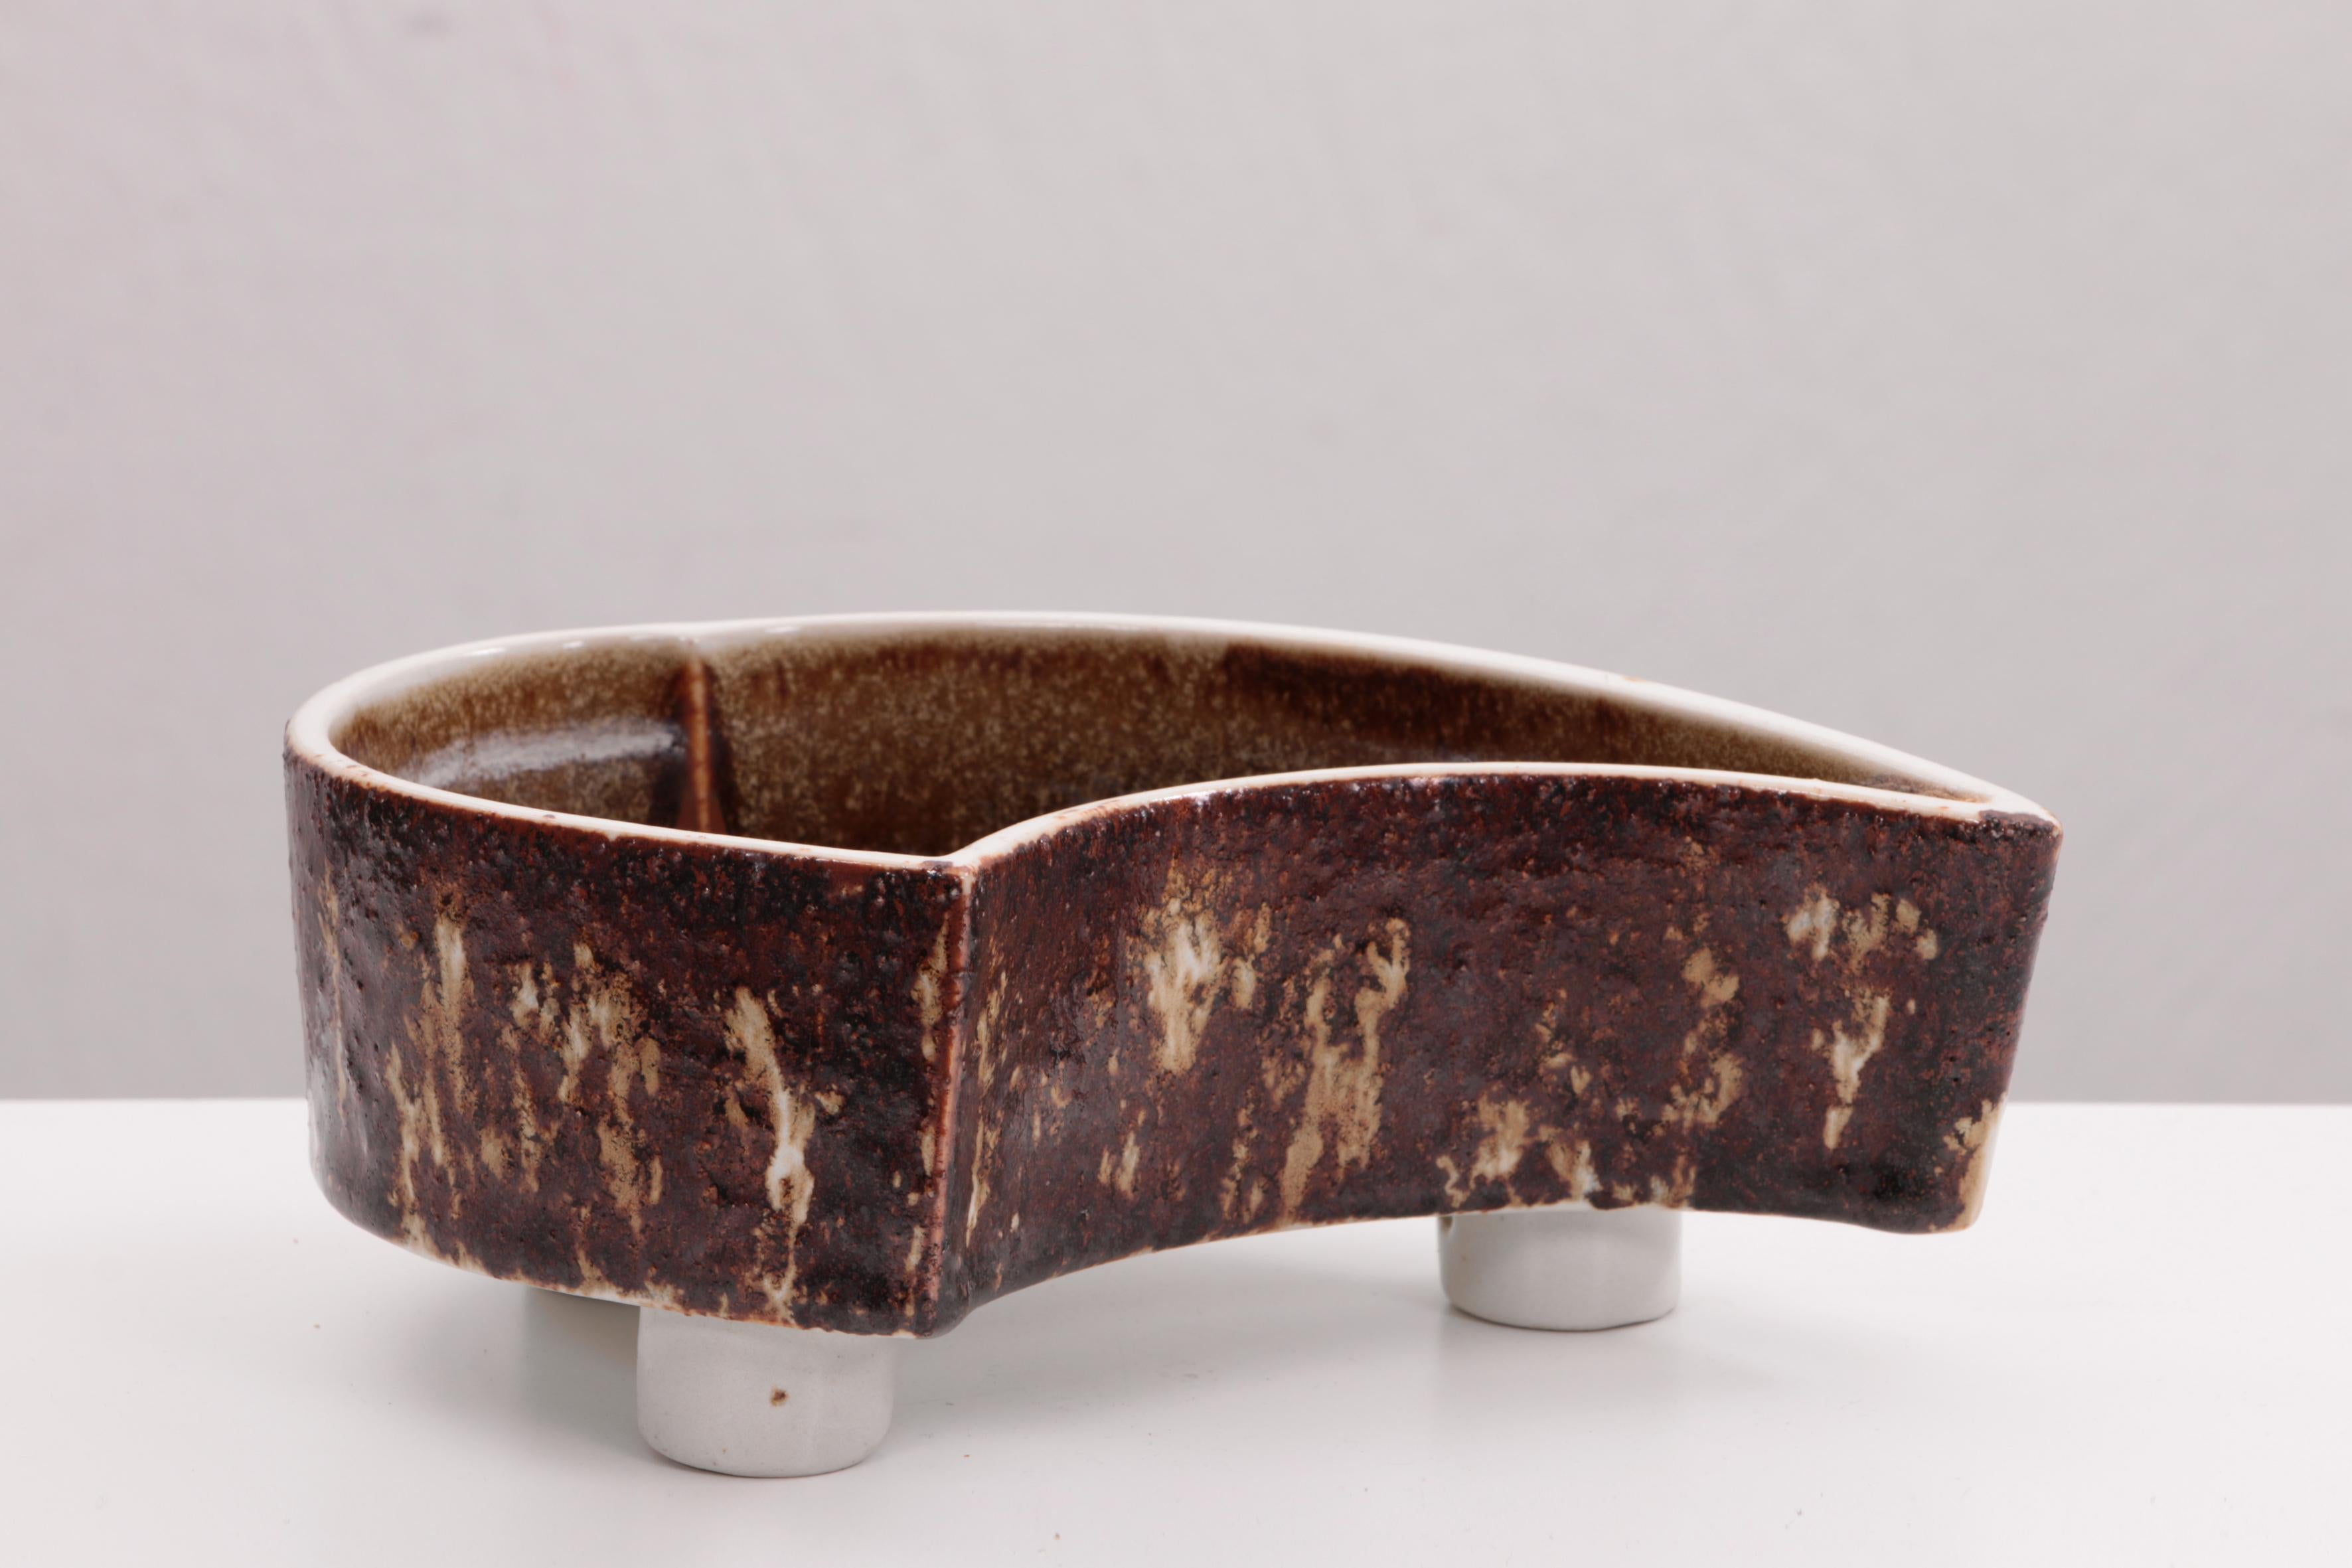 Vintage Ikebana bowl from Yamasan.

The glaze has a rich brown color and resembles highly granular tree bark.

Ikebana is the art of Japanese flower arranging and this bowl would fit in very well. The shell is great in shape.

Marked with 253.